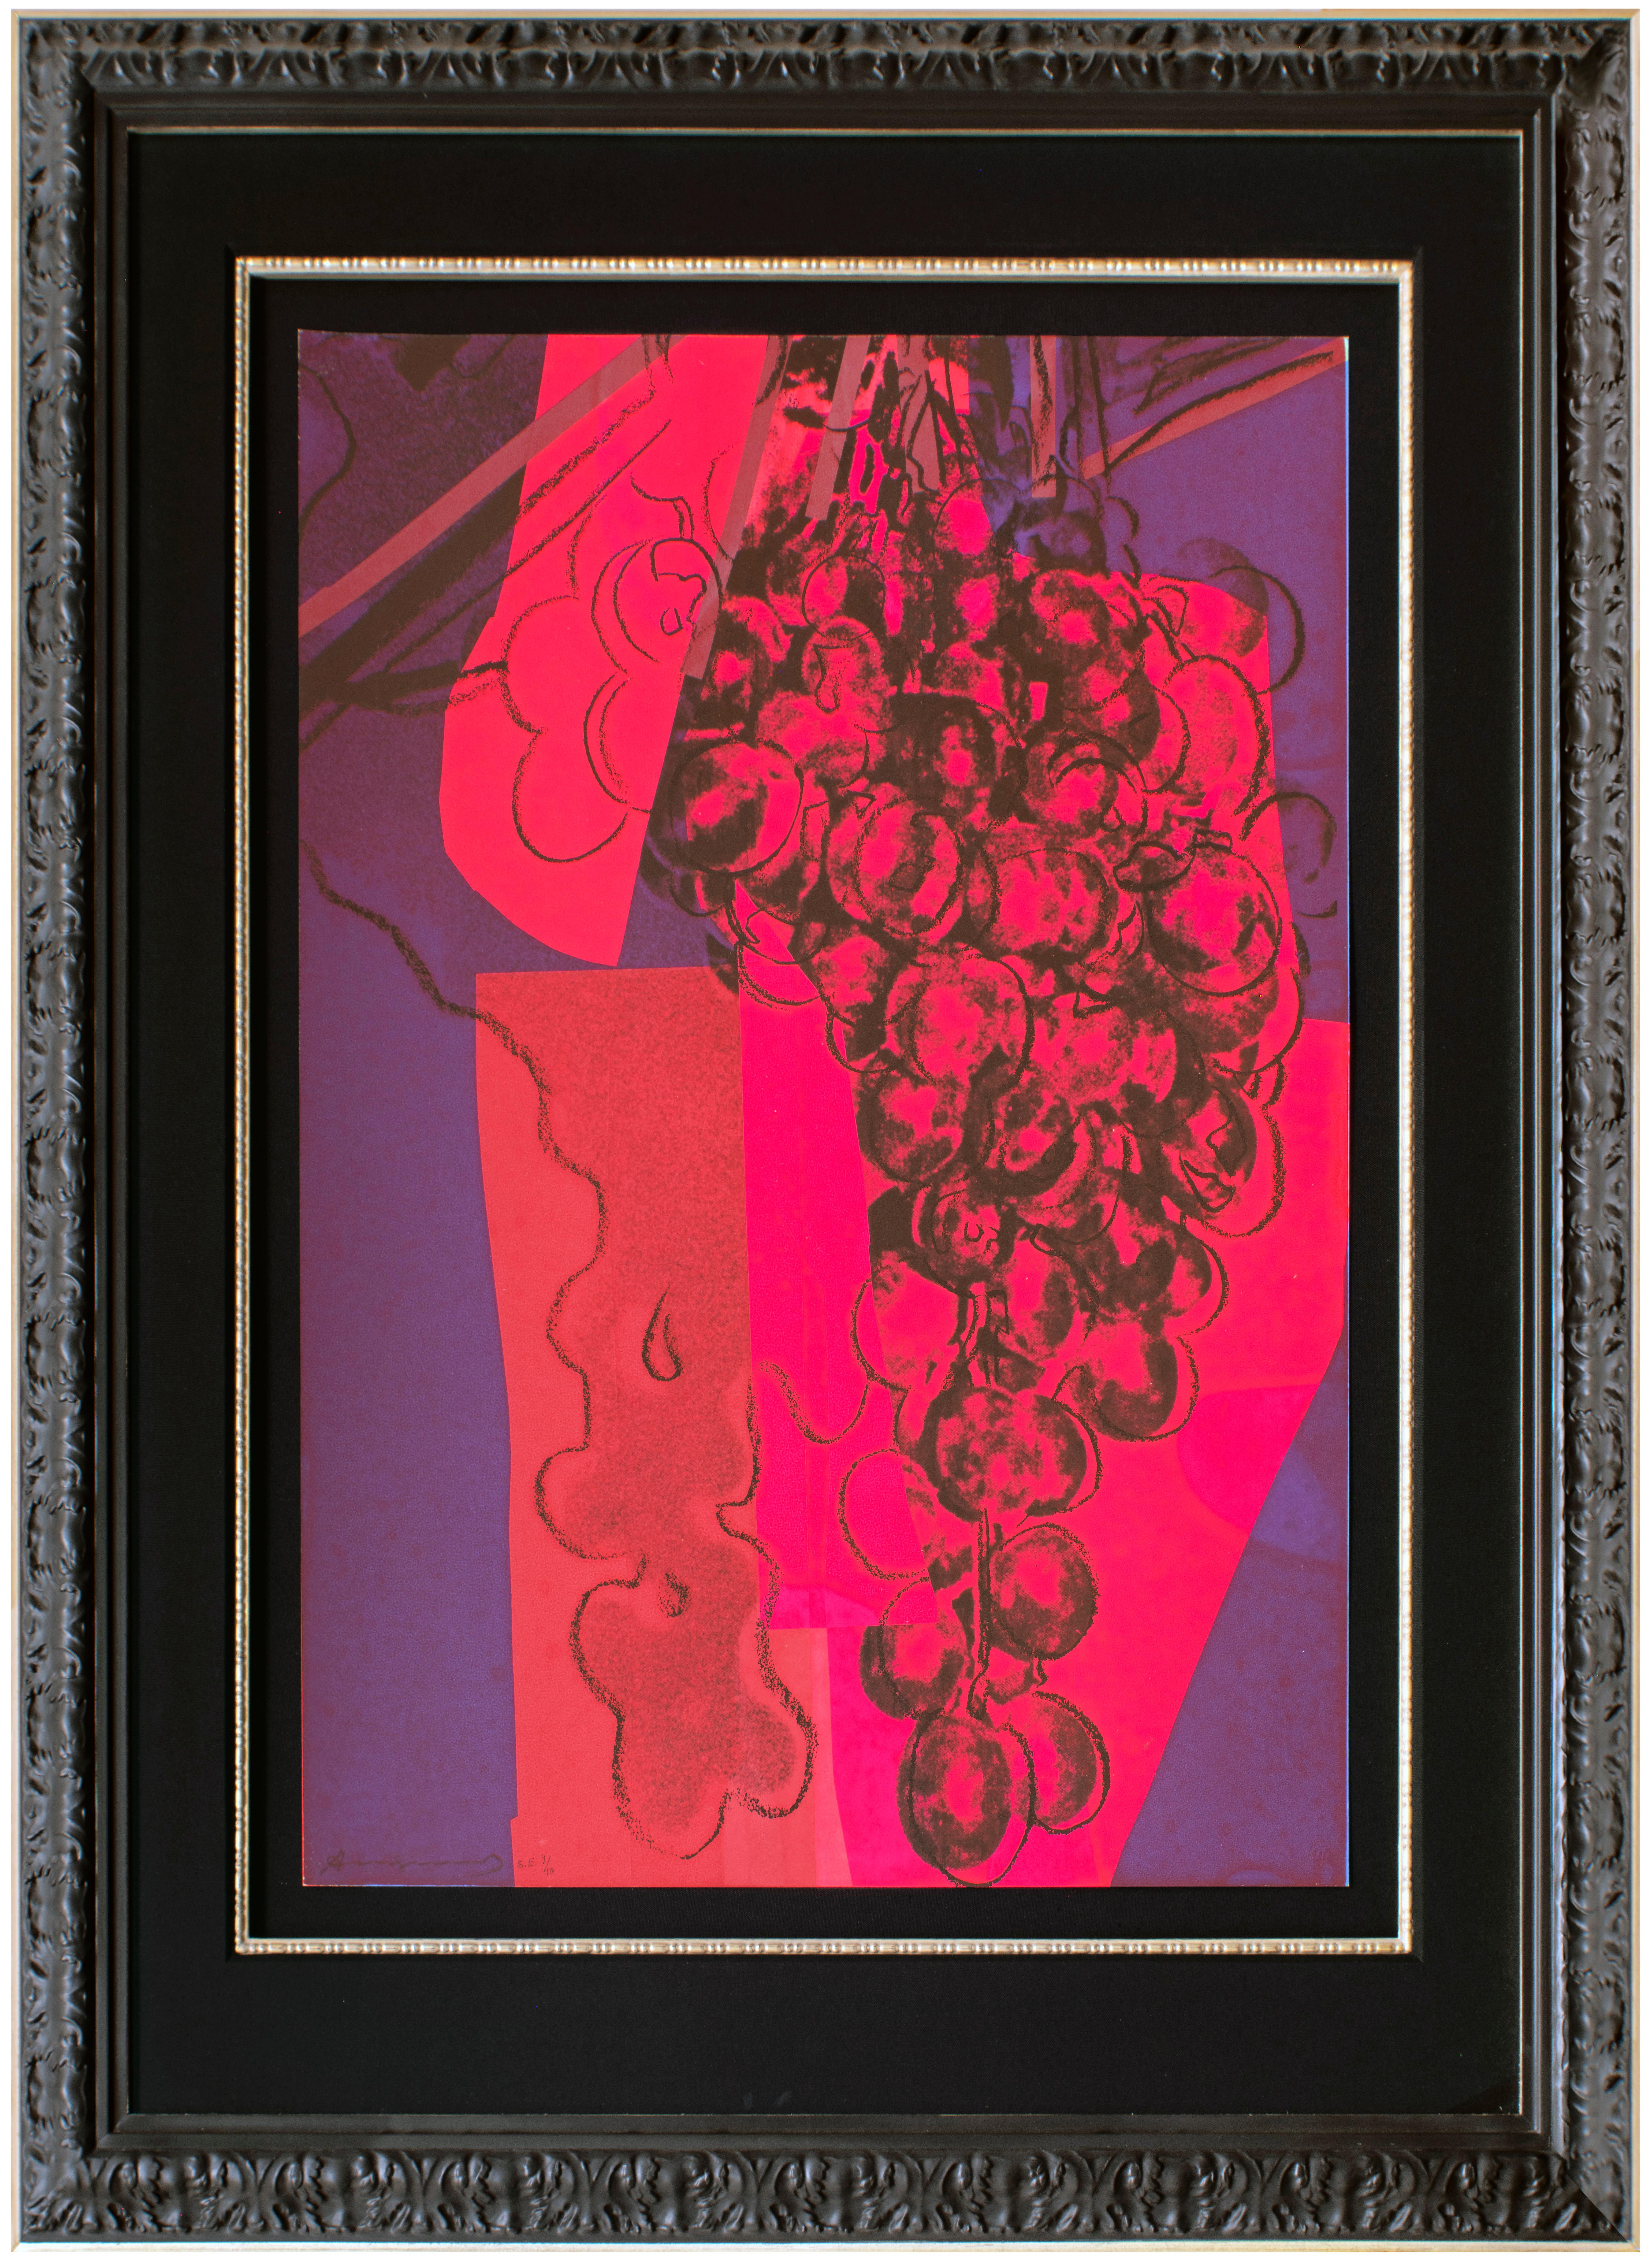 Grapes - Print by Andy Warhol